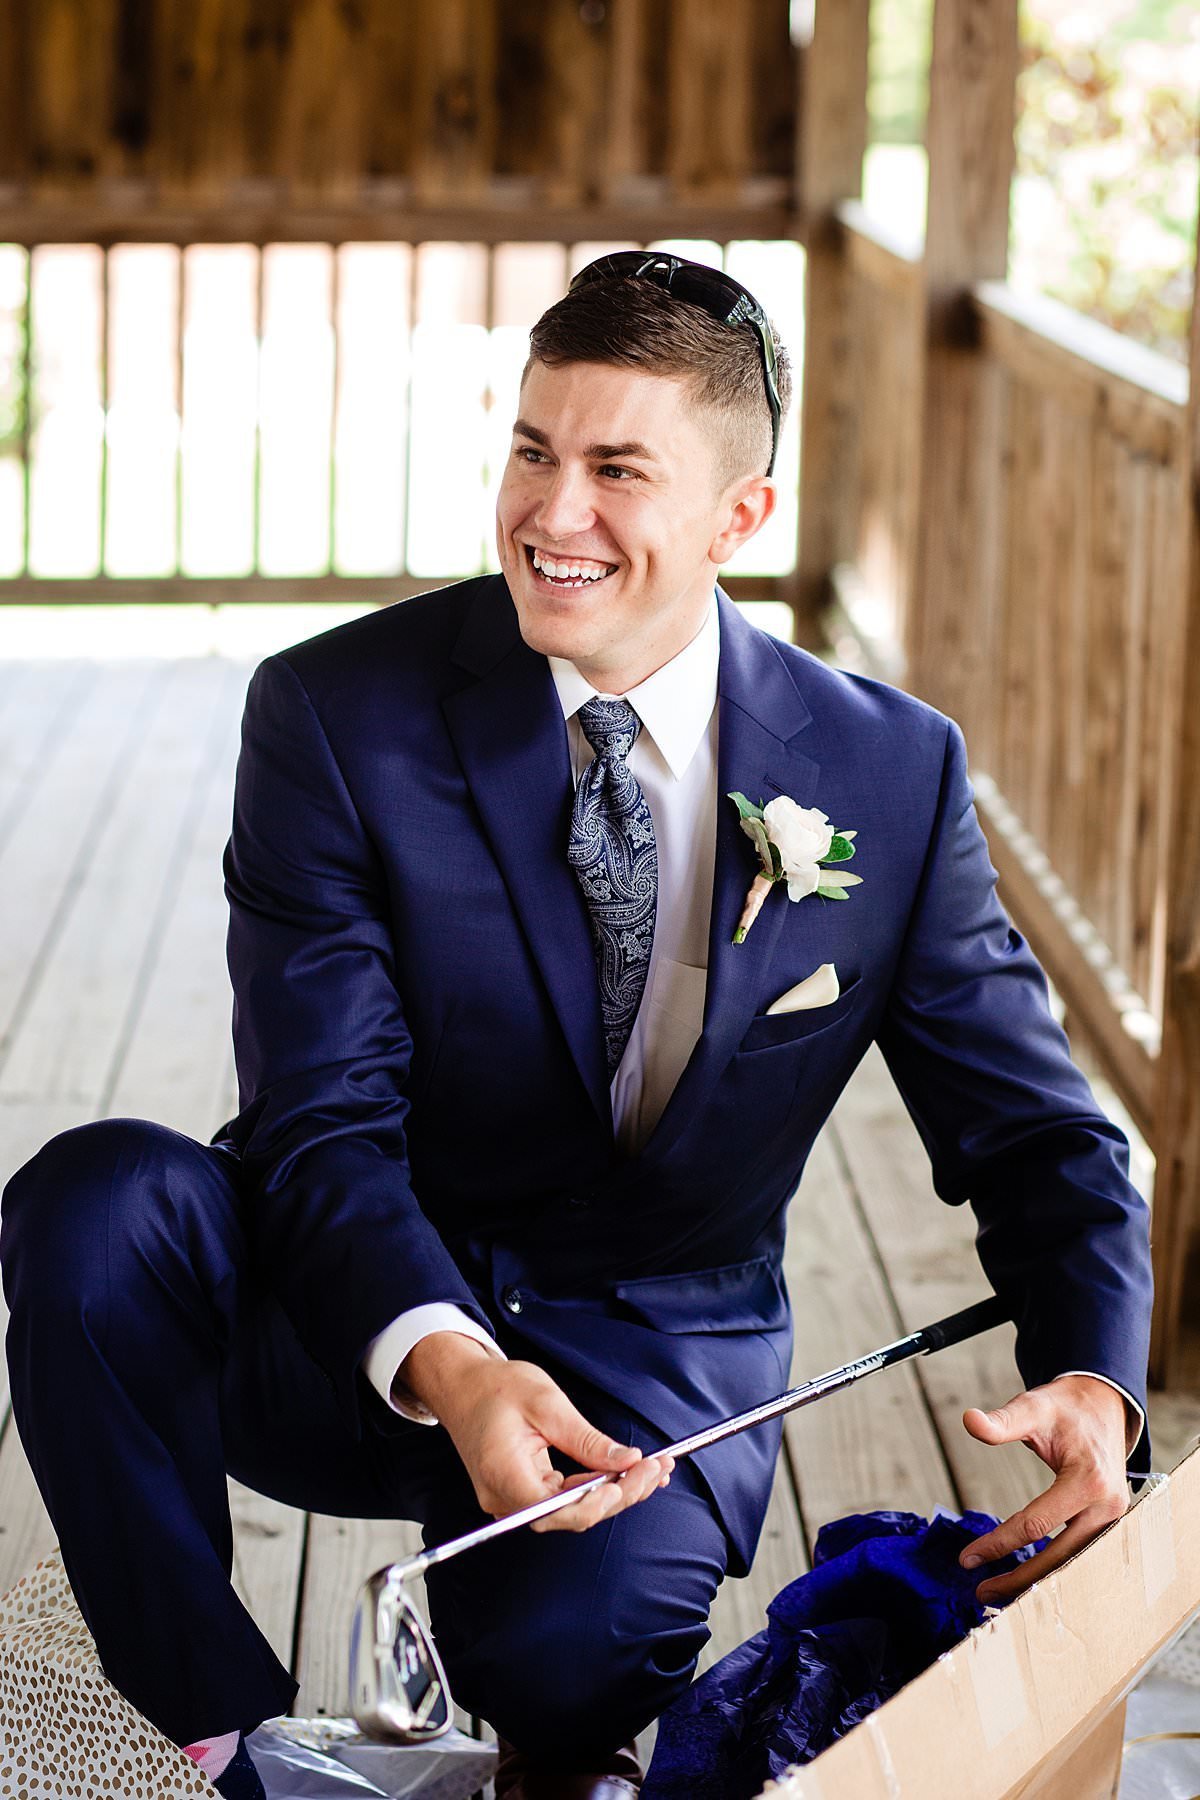 Groom surprised by new golf clubs on wedding day